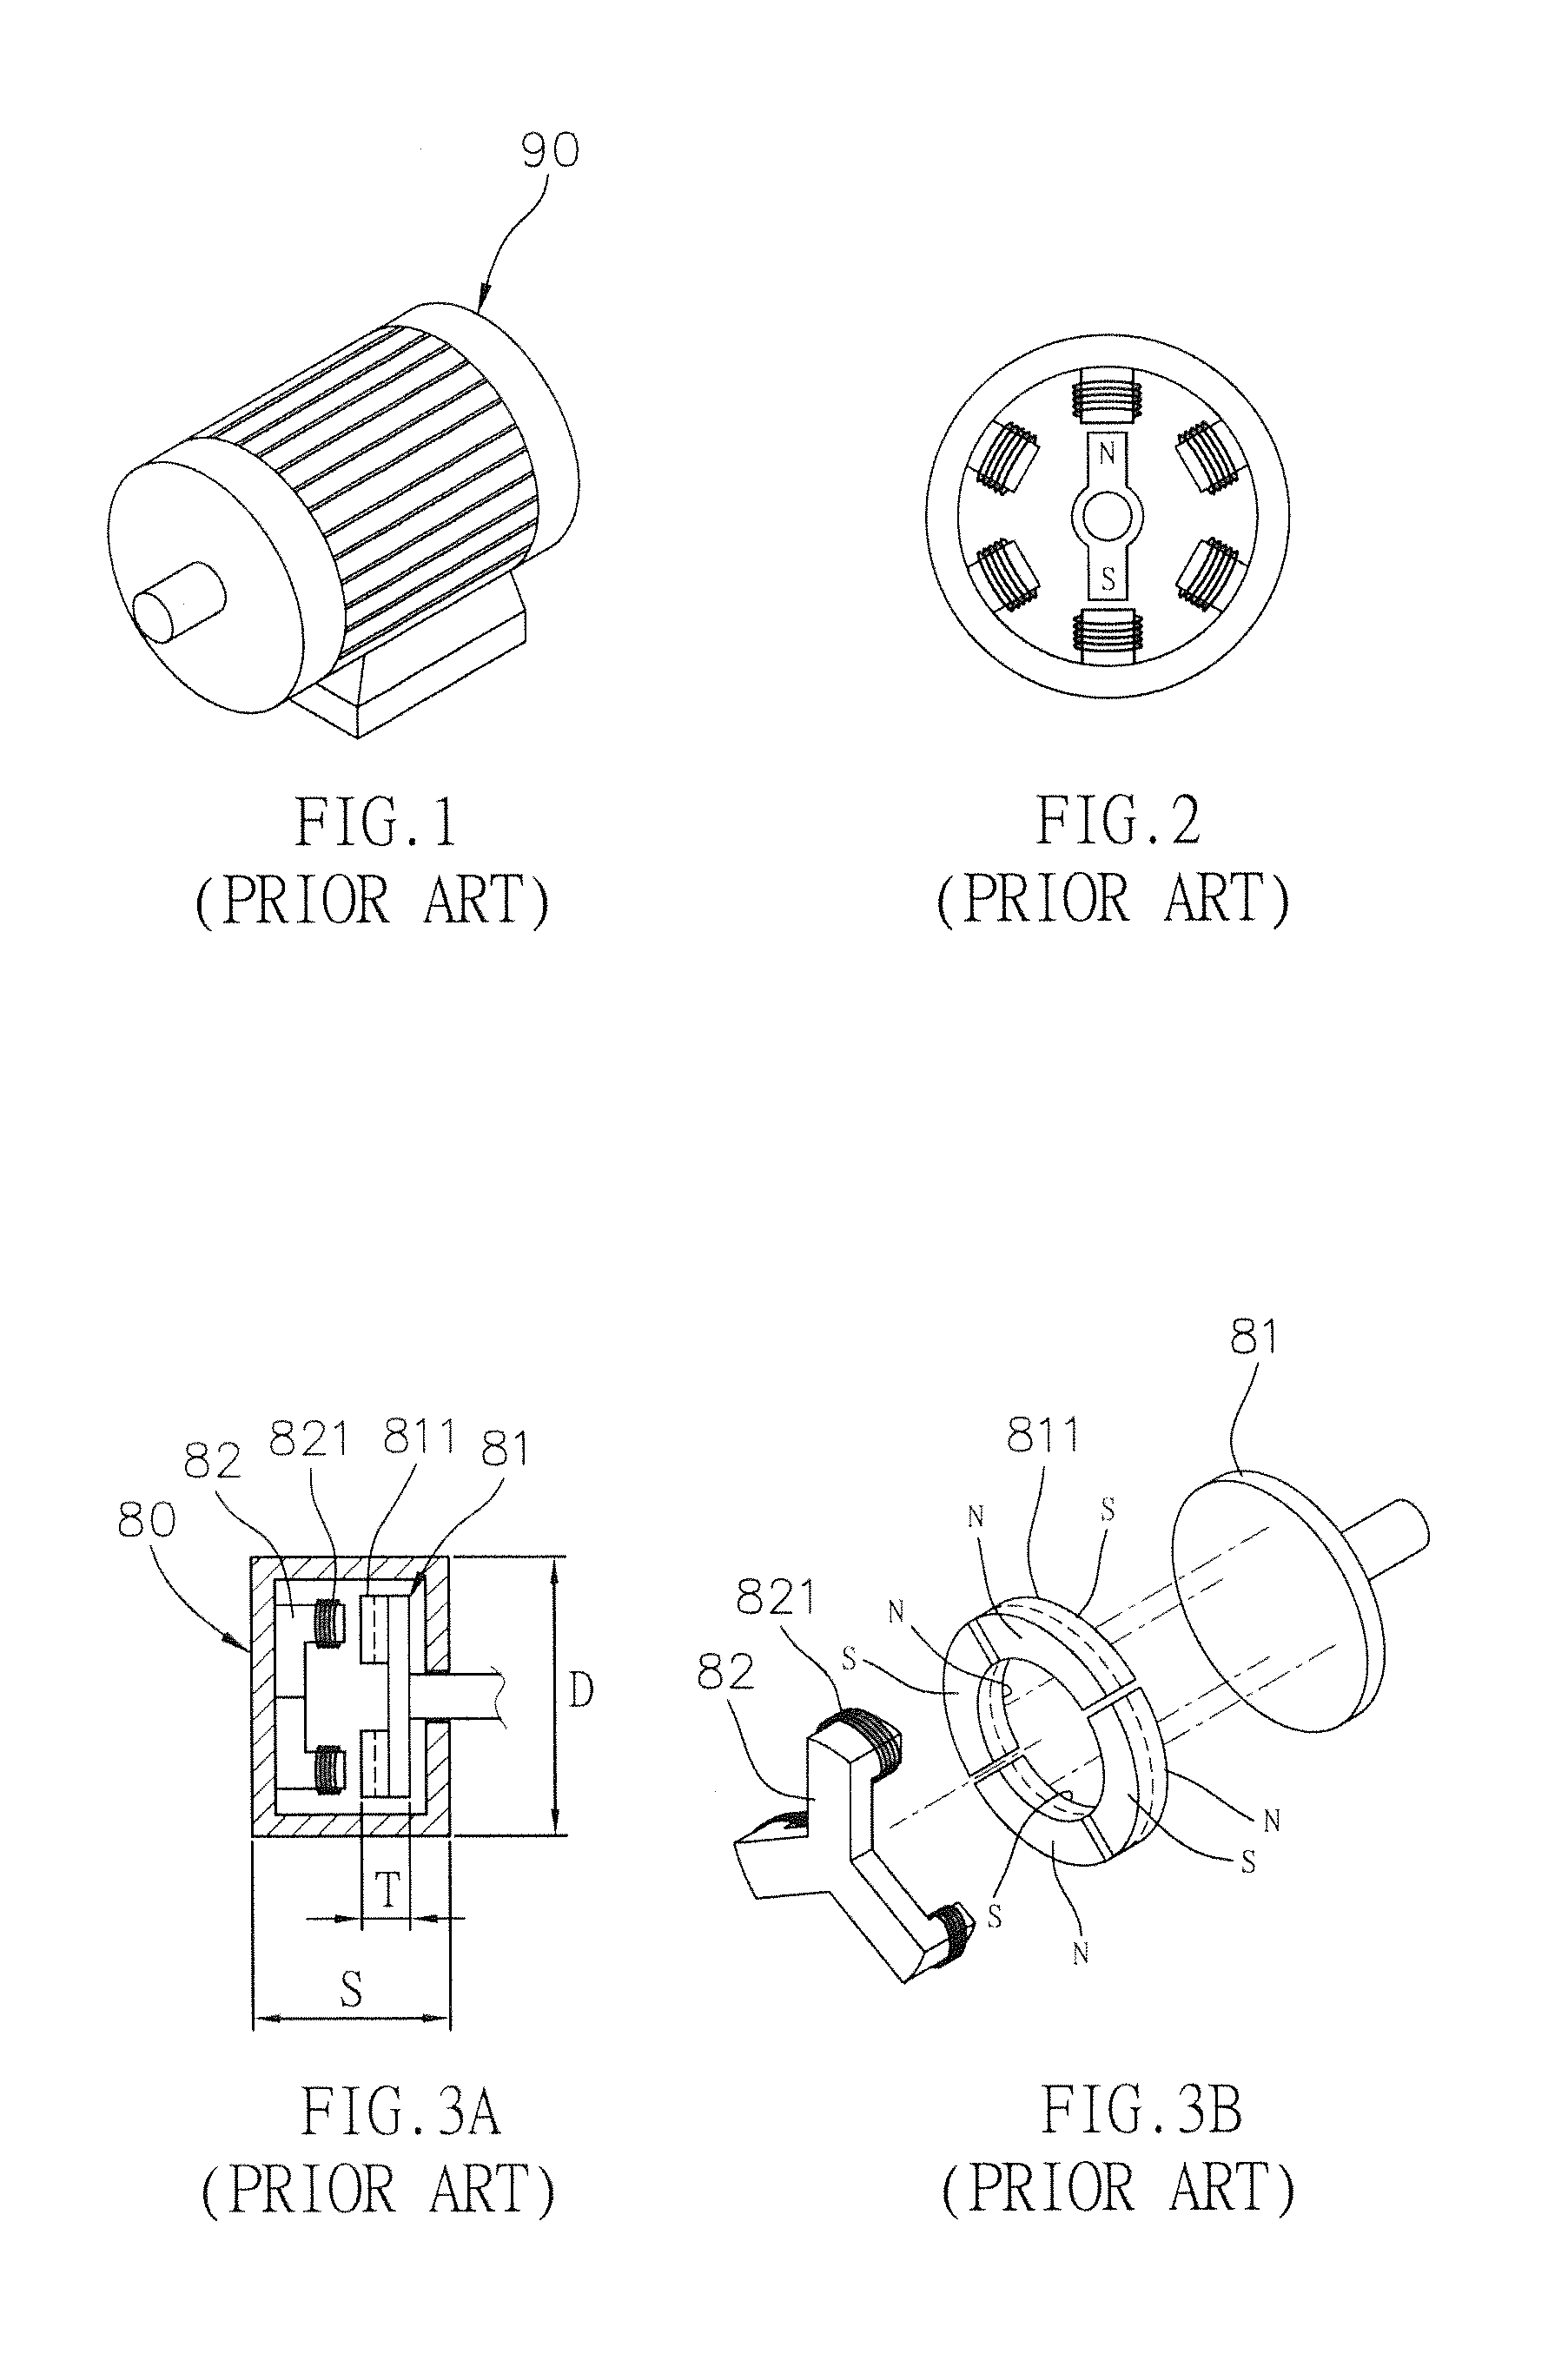 Energy converting device having an eccentric rotor